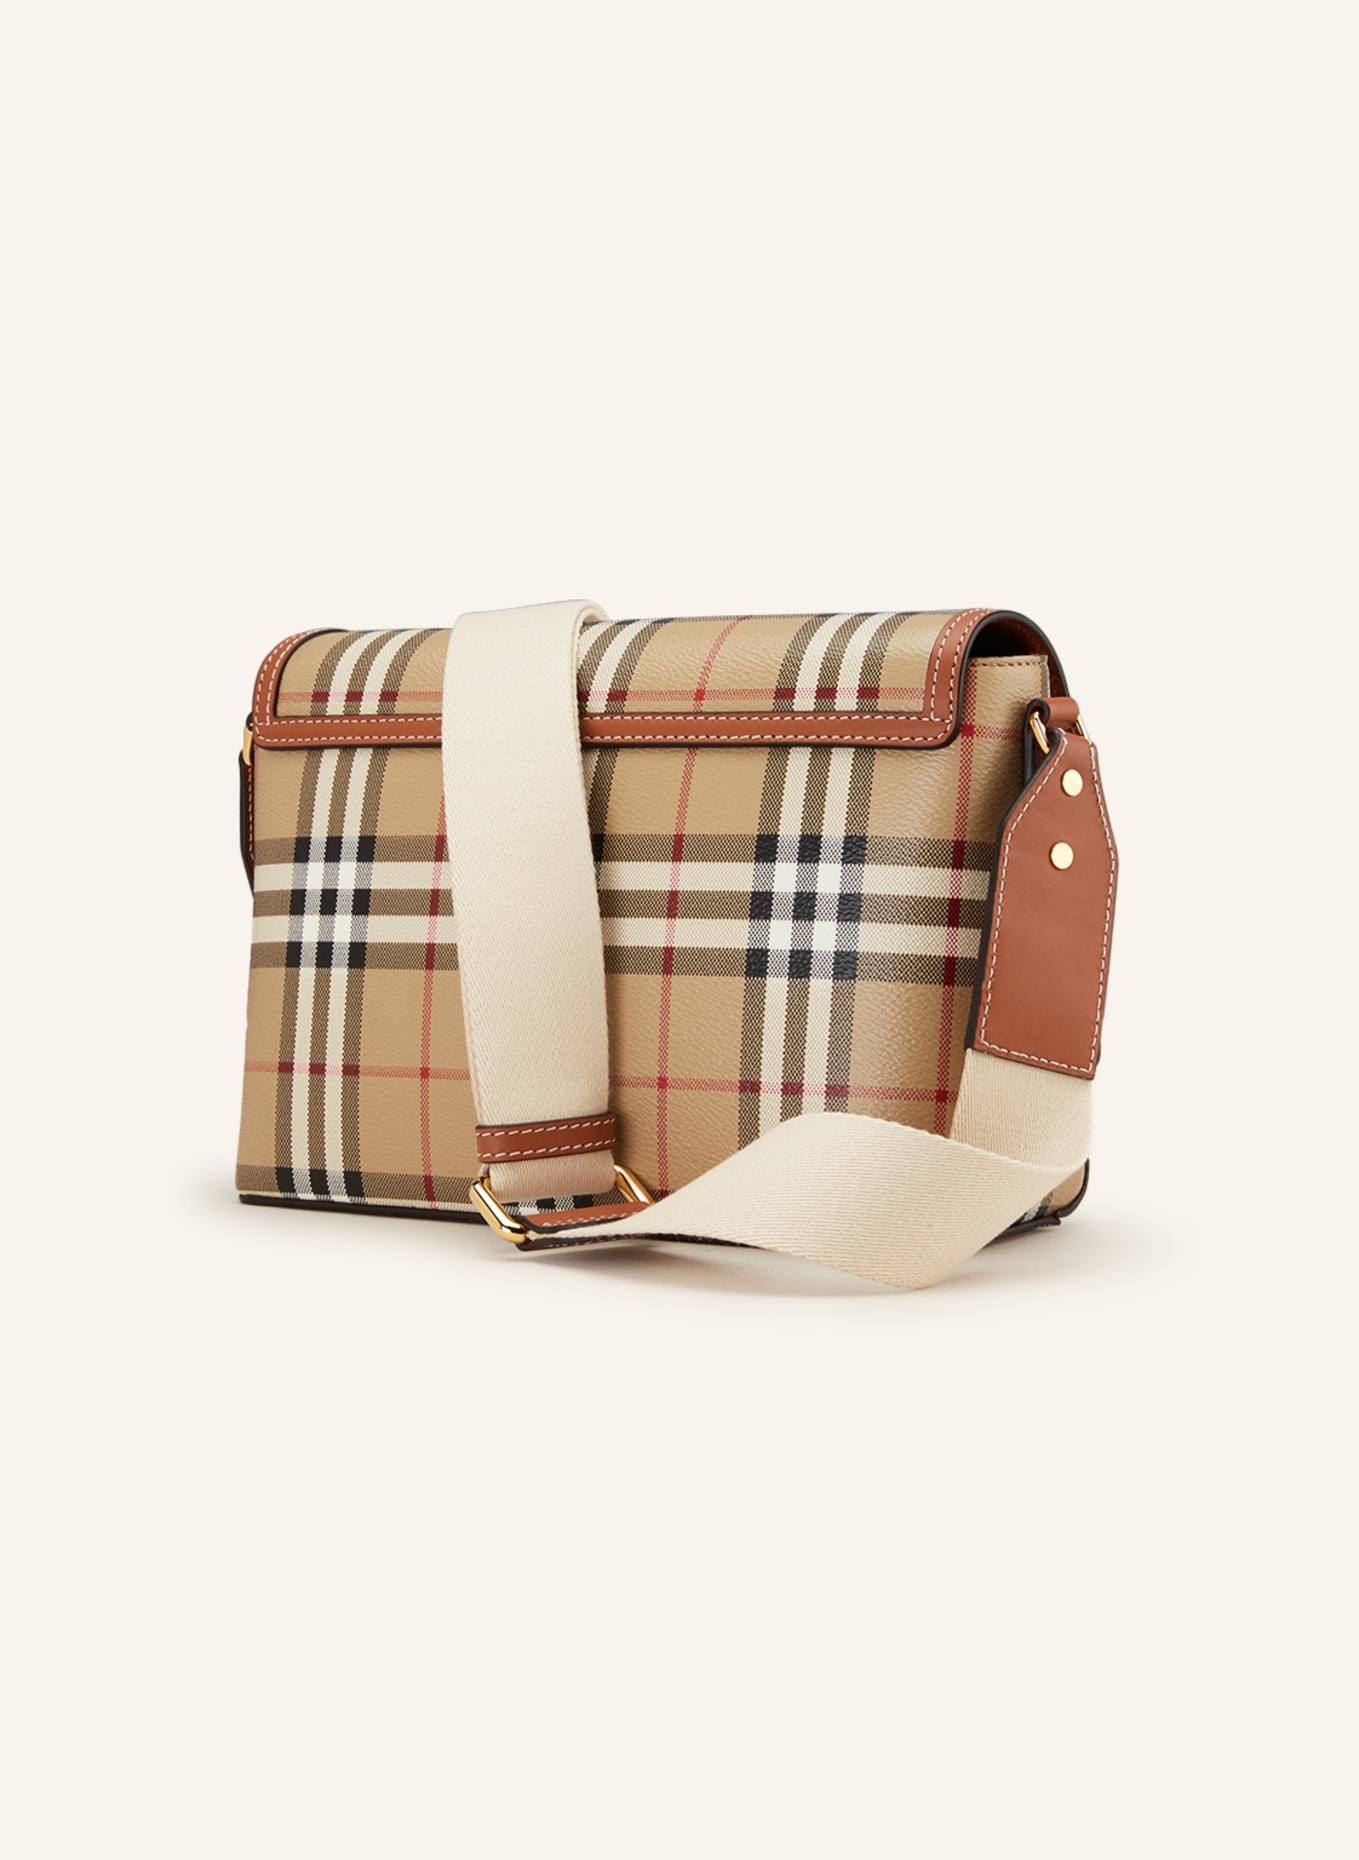 Burberry Small Embossed Messenger Bag - Farfetch | Bags, Messenger bag, Burberry  bag